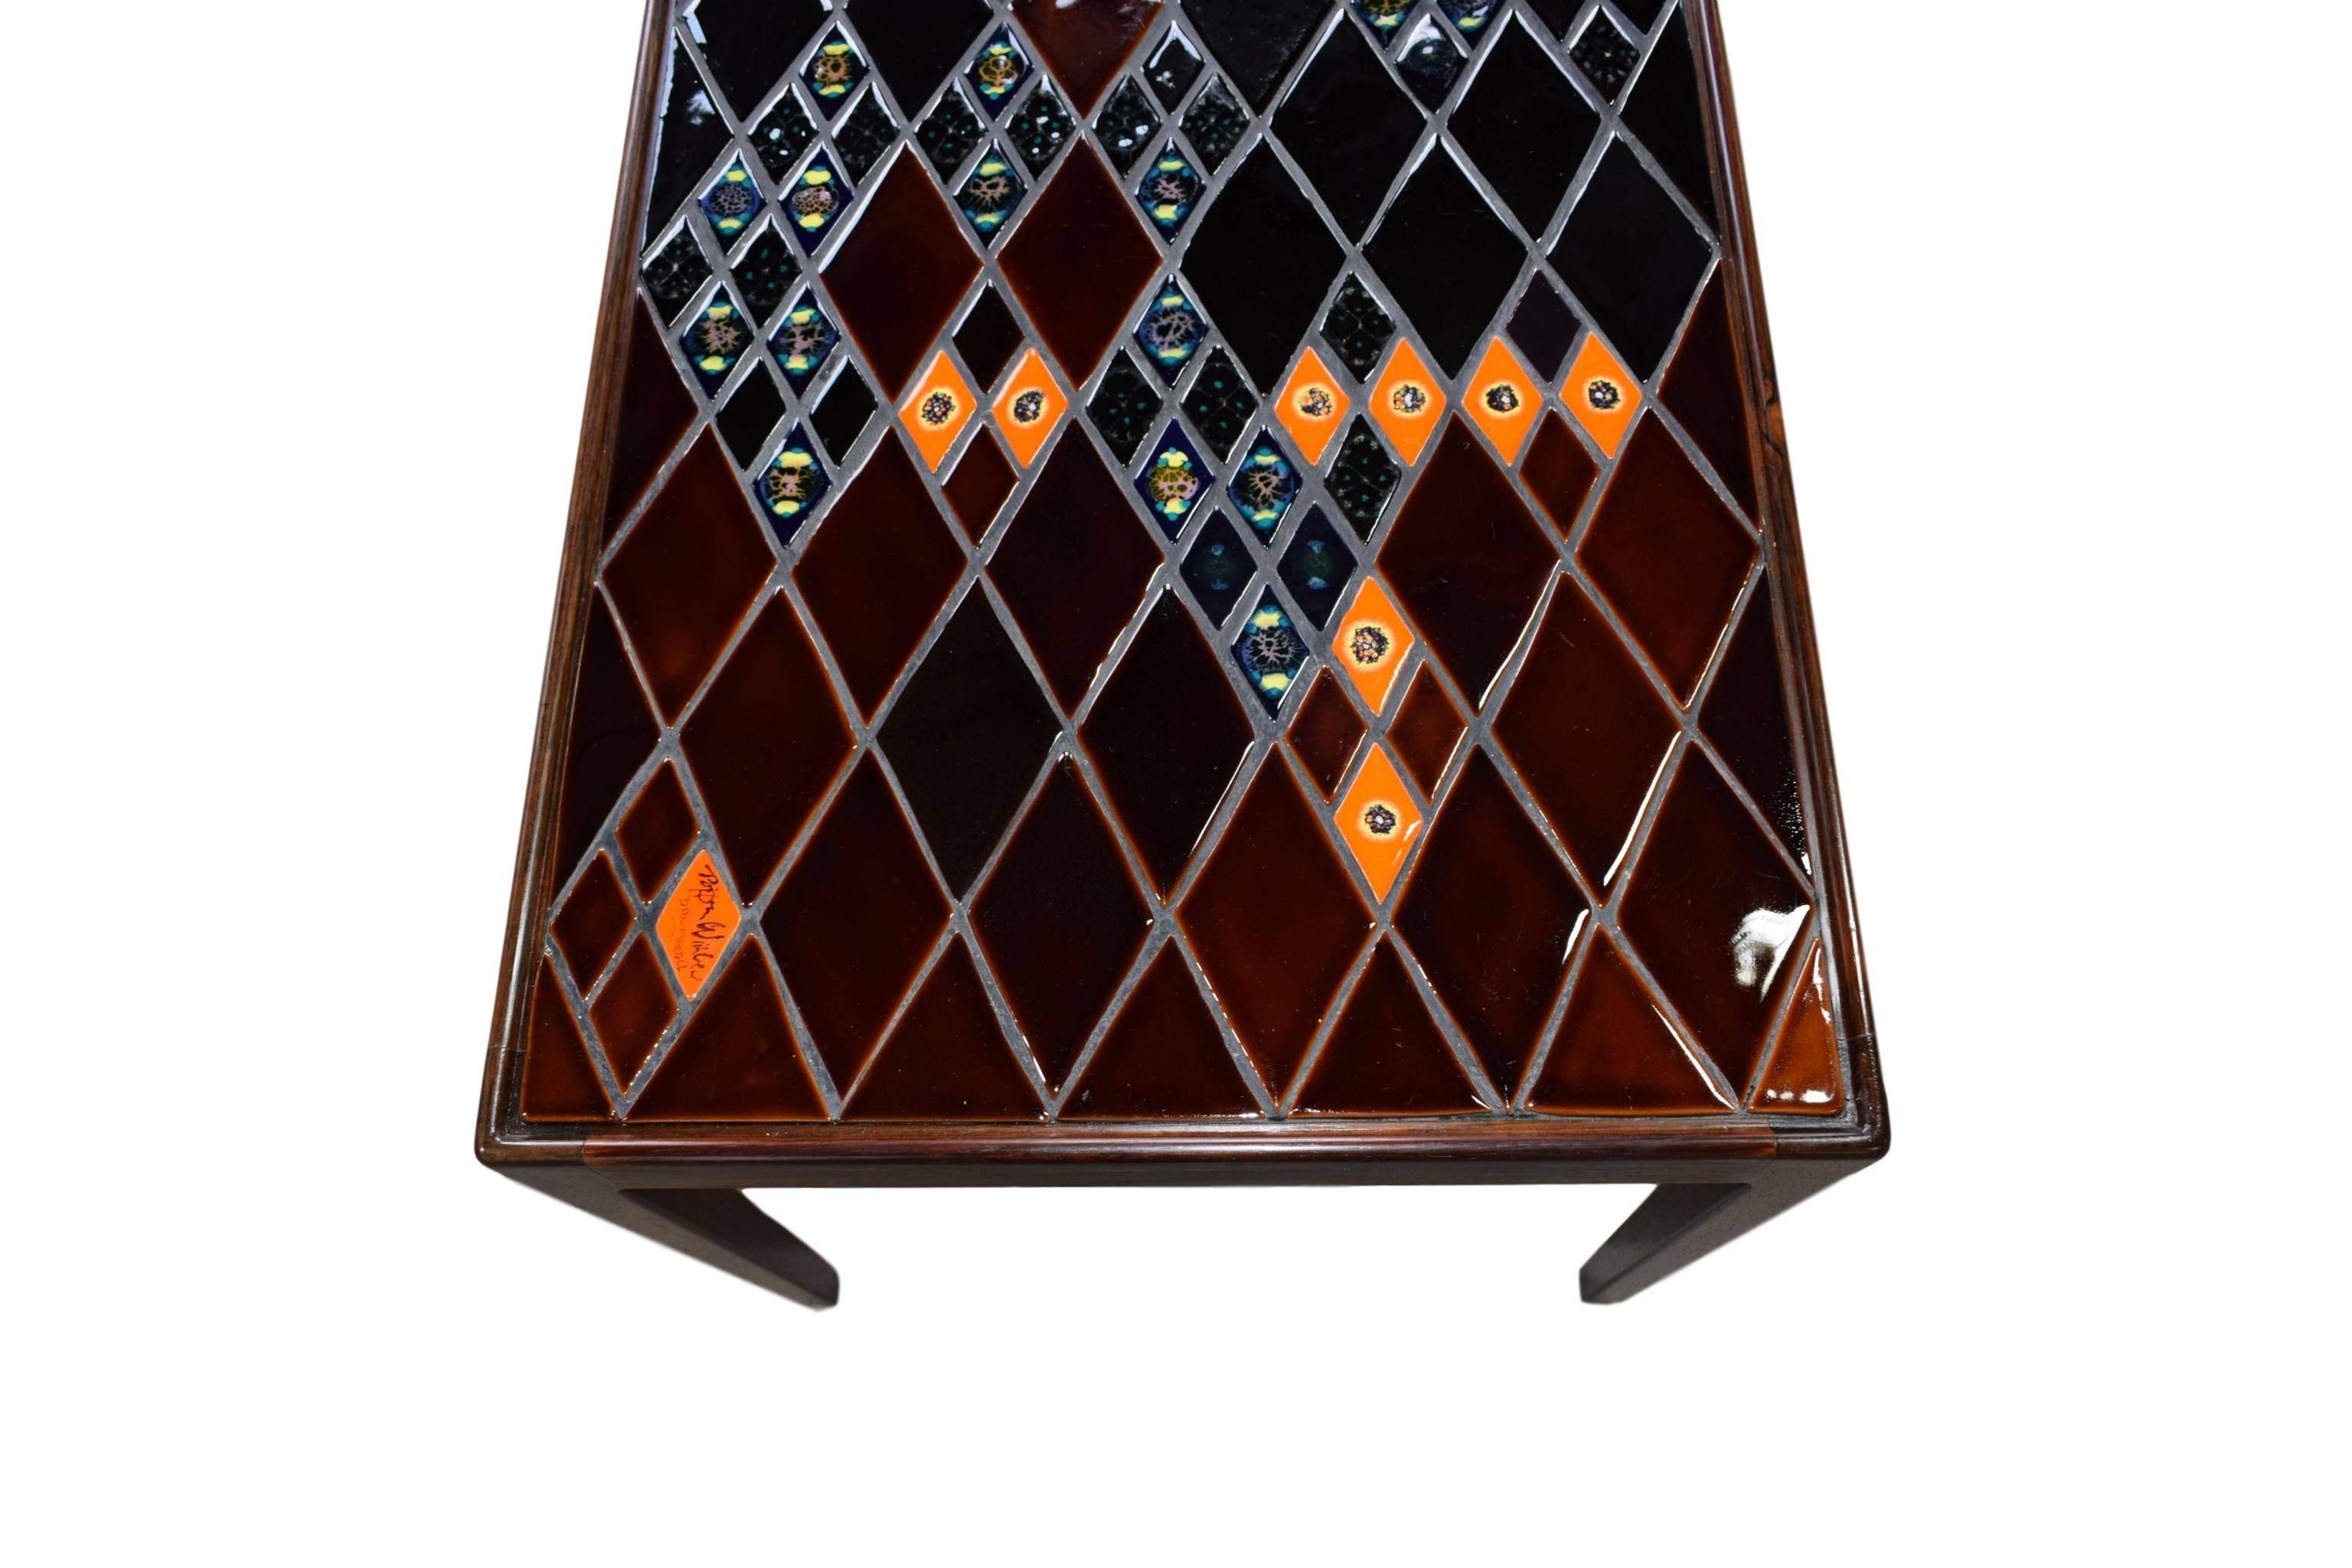 Polychromed Danish Midcentury Rosewood Coffee Table with Decorative Tiles by Bjørn Wiinblad For Sale